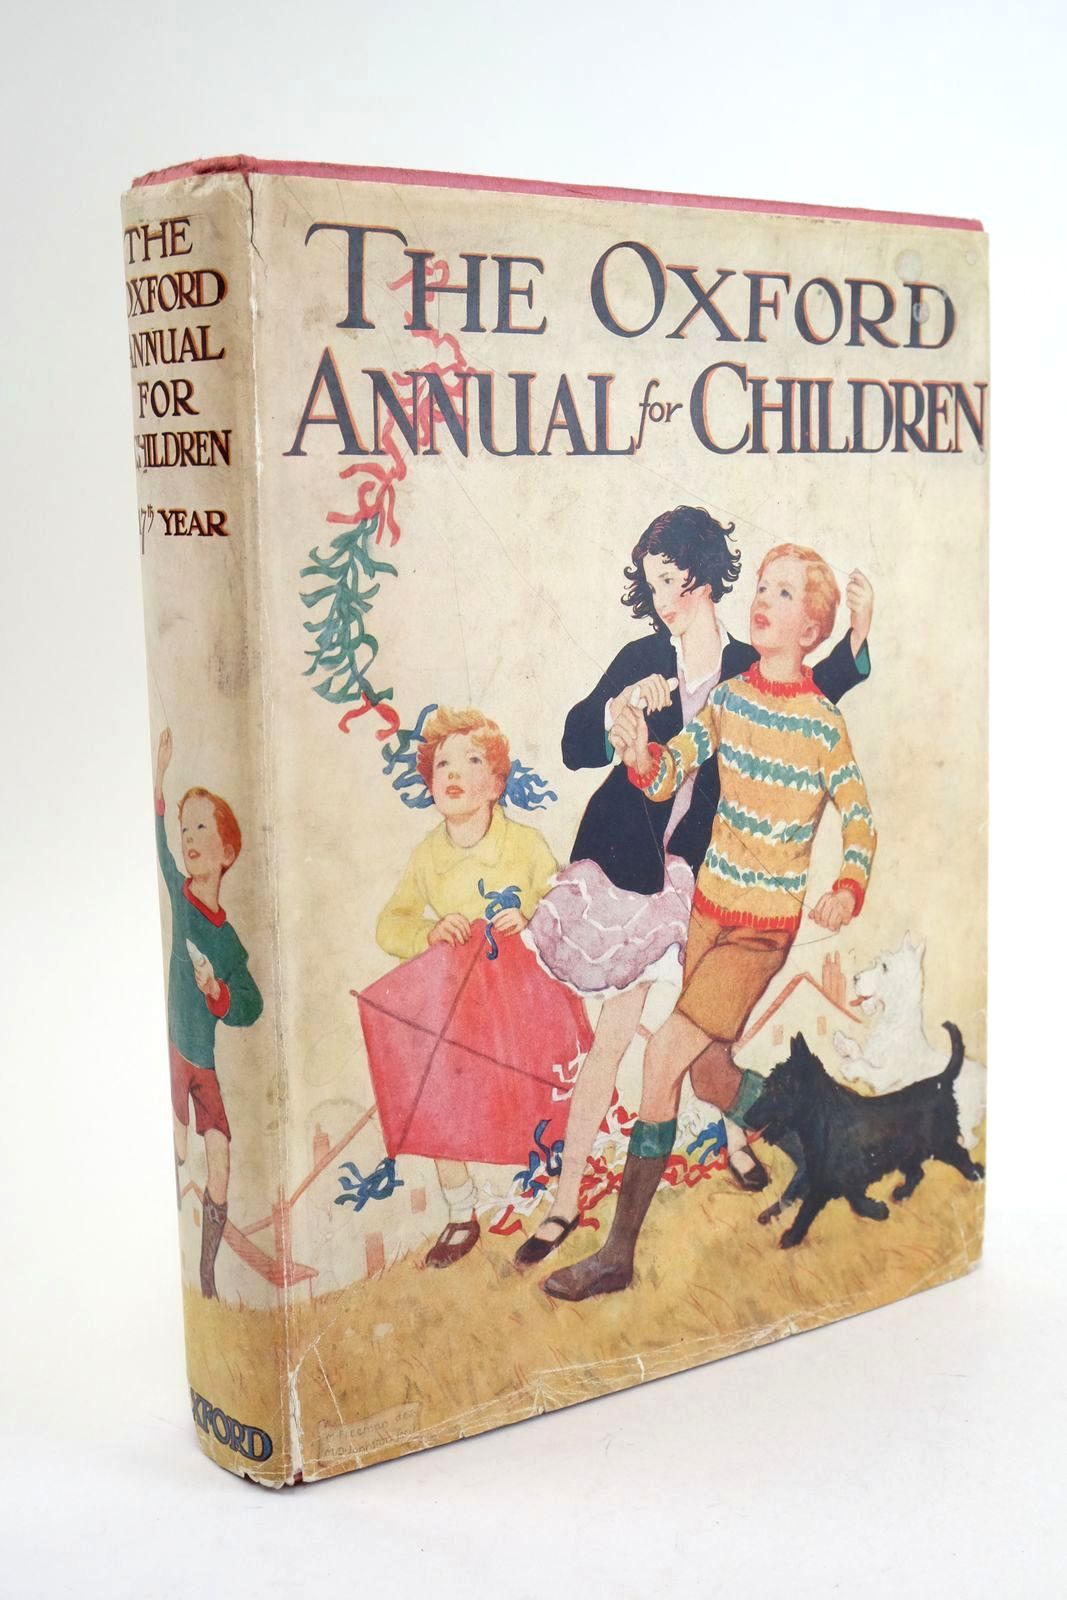 Photo of THE OXFORD ANNUAL FOR CHILDREN 17TH YEAR written by Baker, Margaret Bayne, Charles S. Rutley, Cecily M. Englefield, Cicely et al,  illustrated by Reeve, Mary Strange Lodge, Grace Peart, M.A. Watson, A.H. Harrison, Florence et al.,  published by Oxford University Press, Humphrey Milford (STOCK CODE: 1324840)  for sale by Stella & Rose's Books